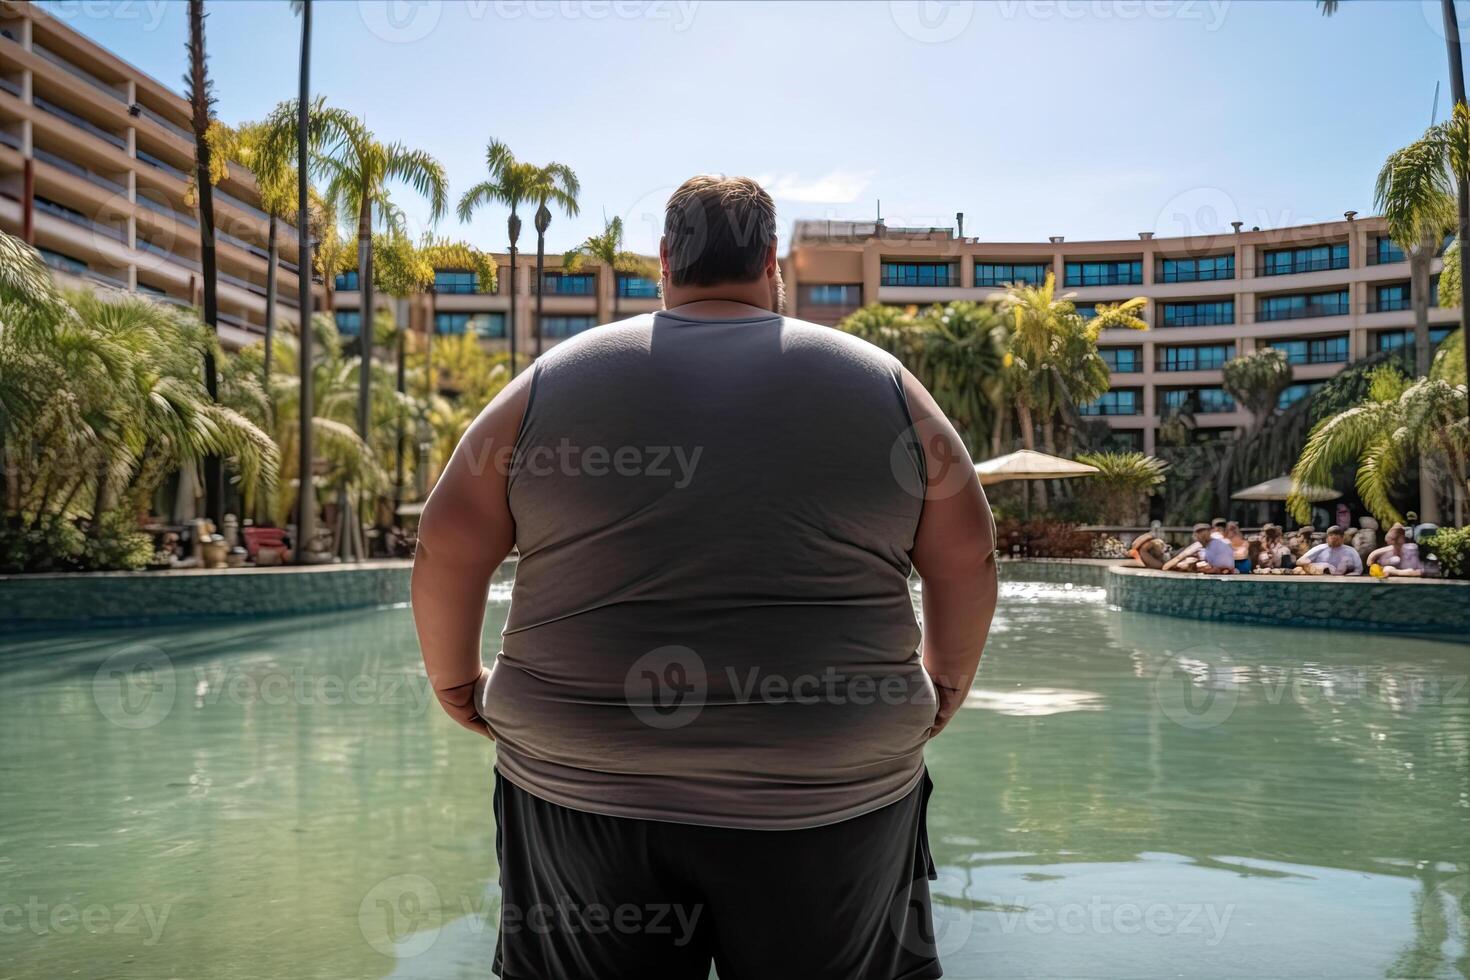 Fat man at summer vacations near swimming pool. Obesity problem. photo